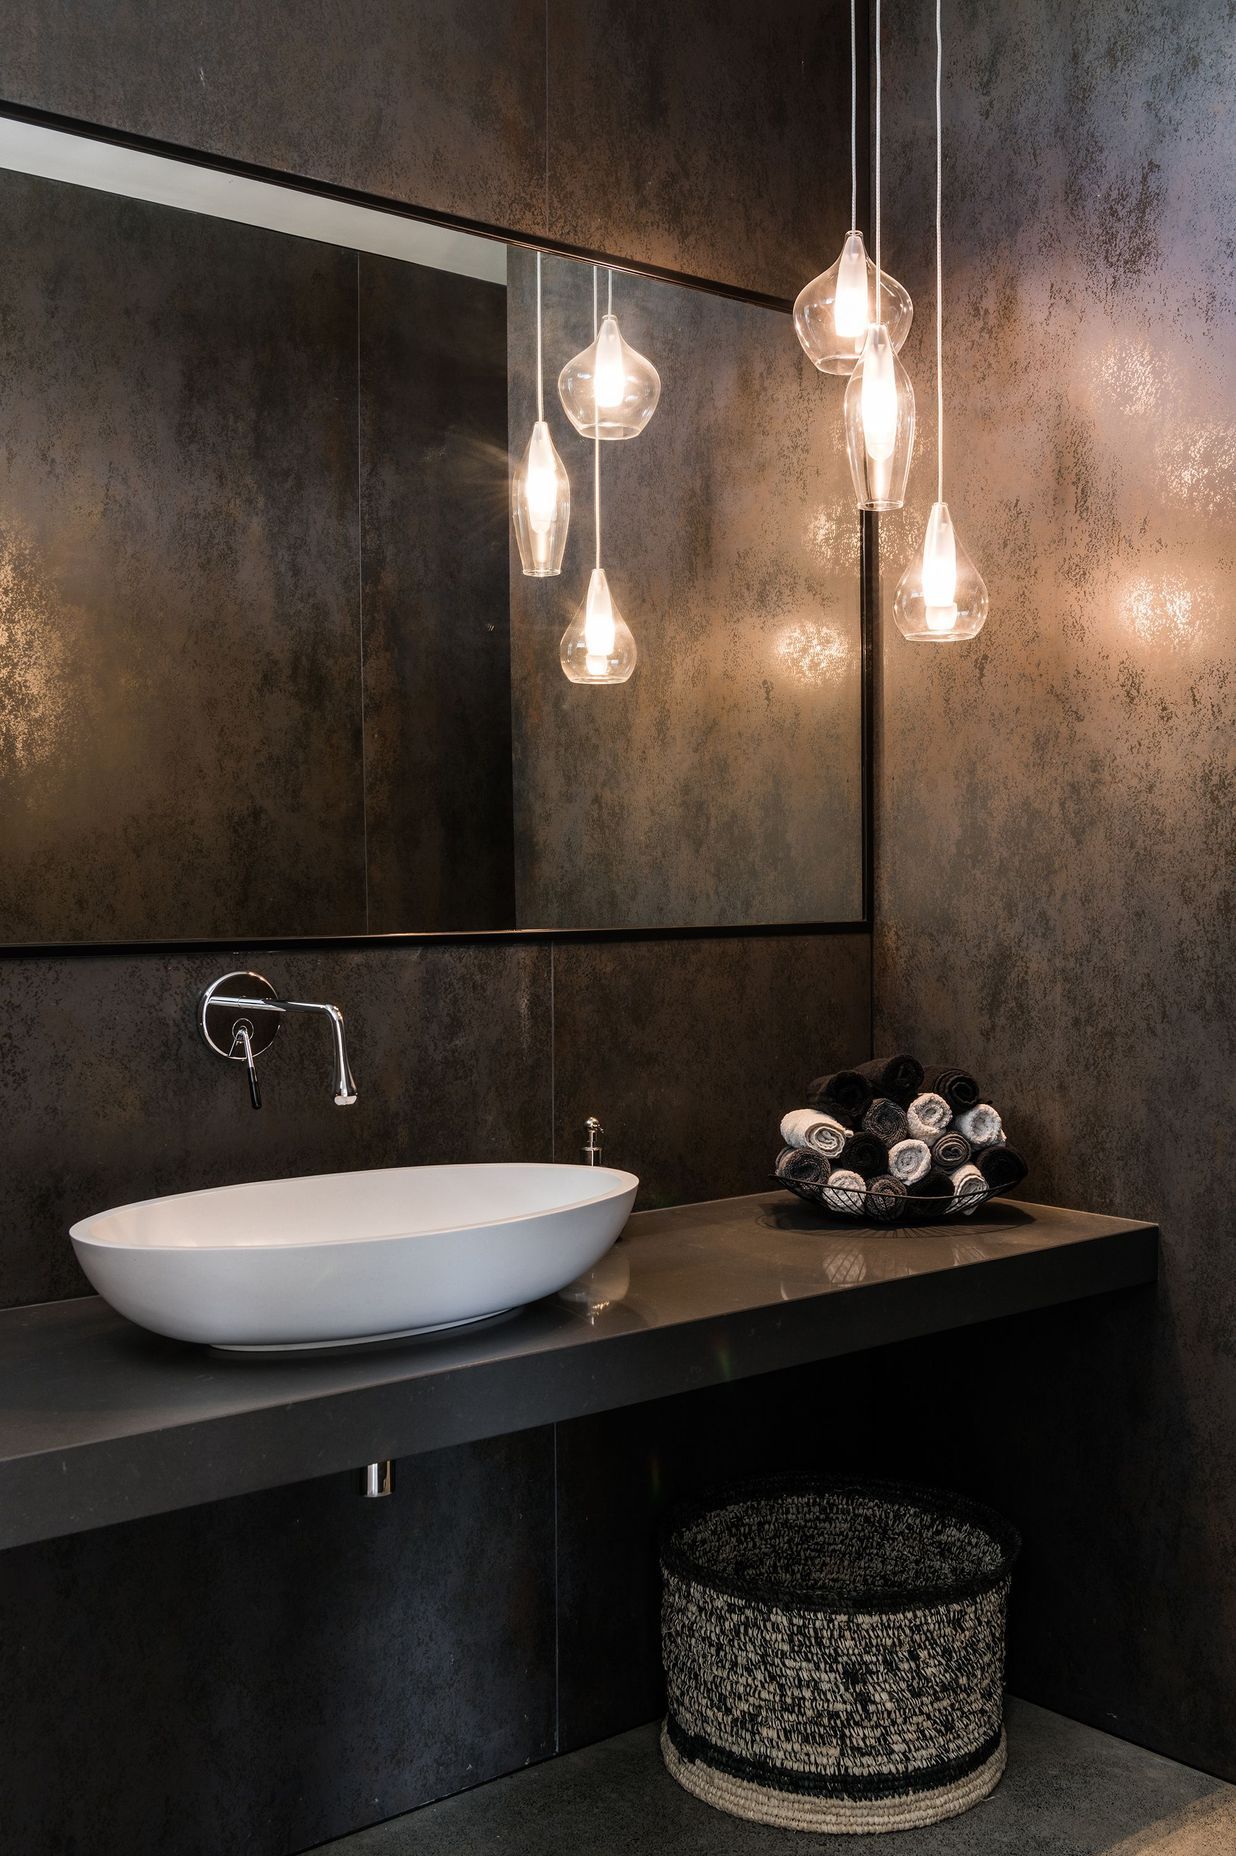 One of the bathrooms features a glass pendant light and metallic-specked tiles.